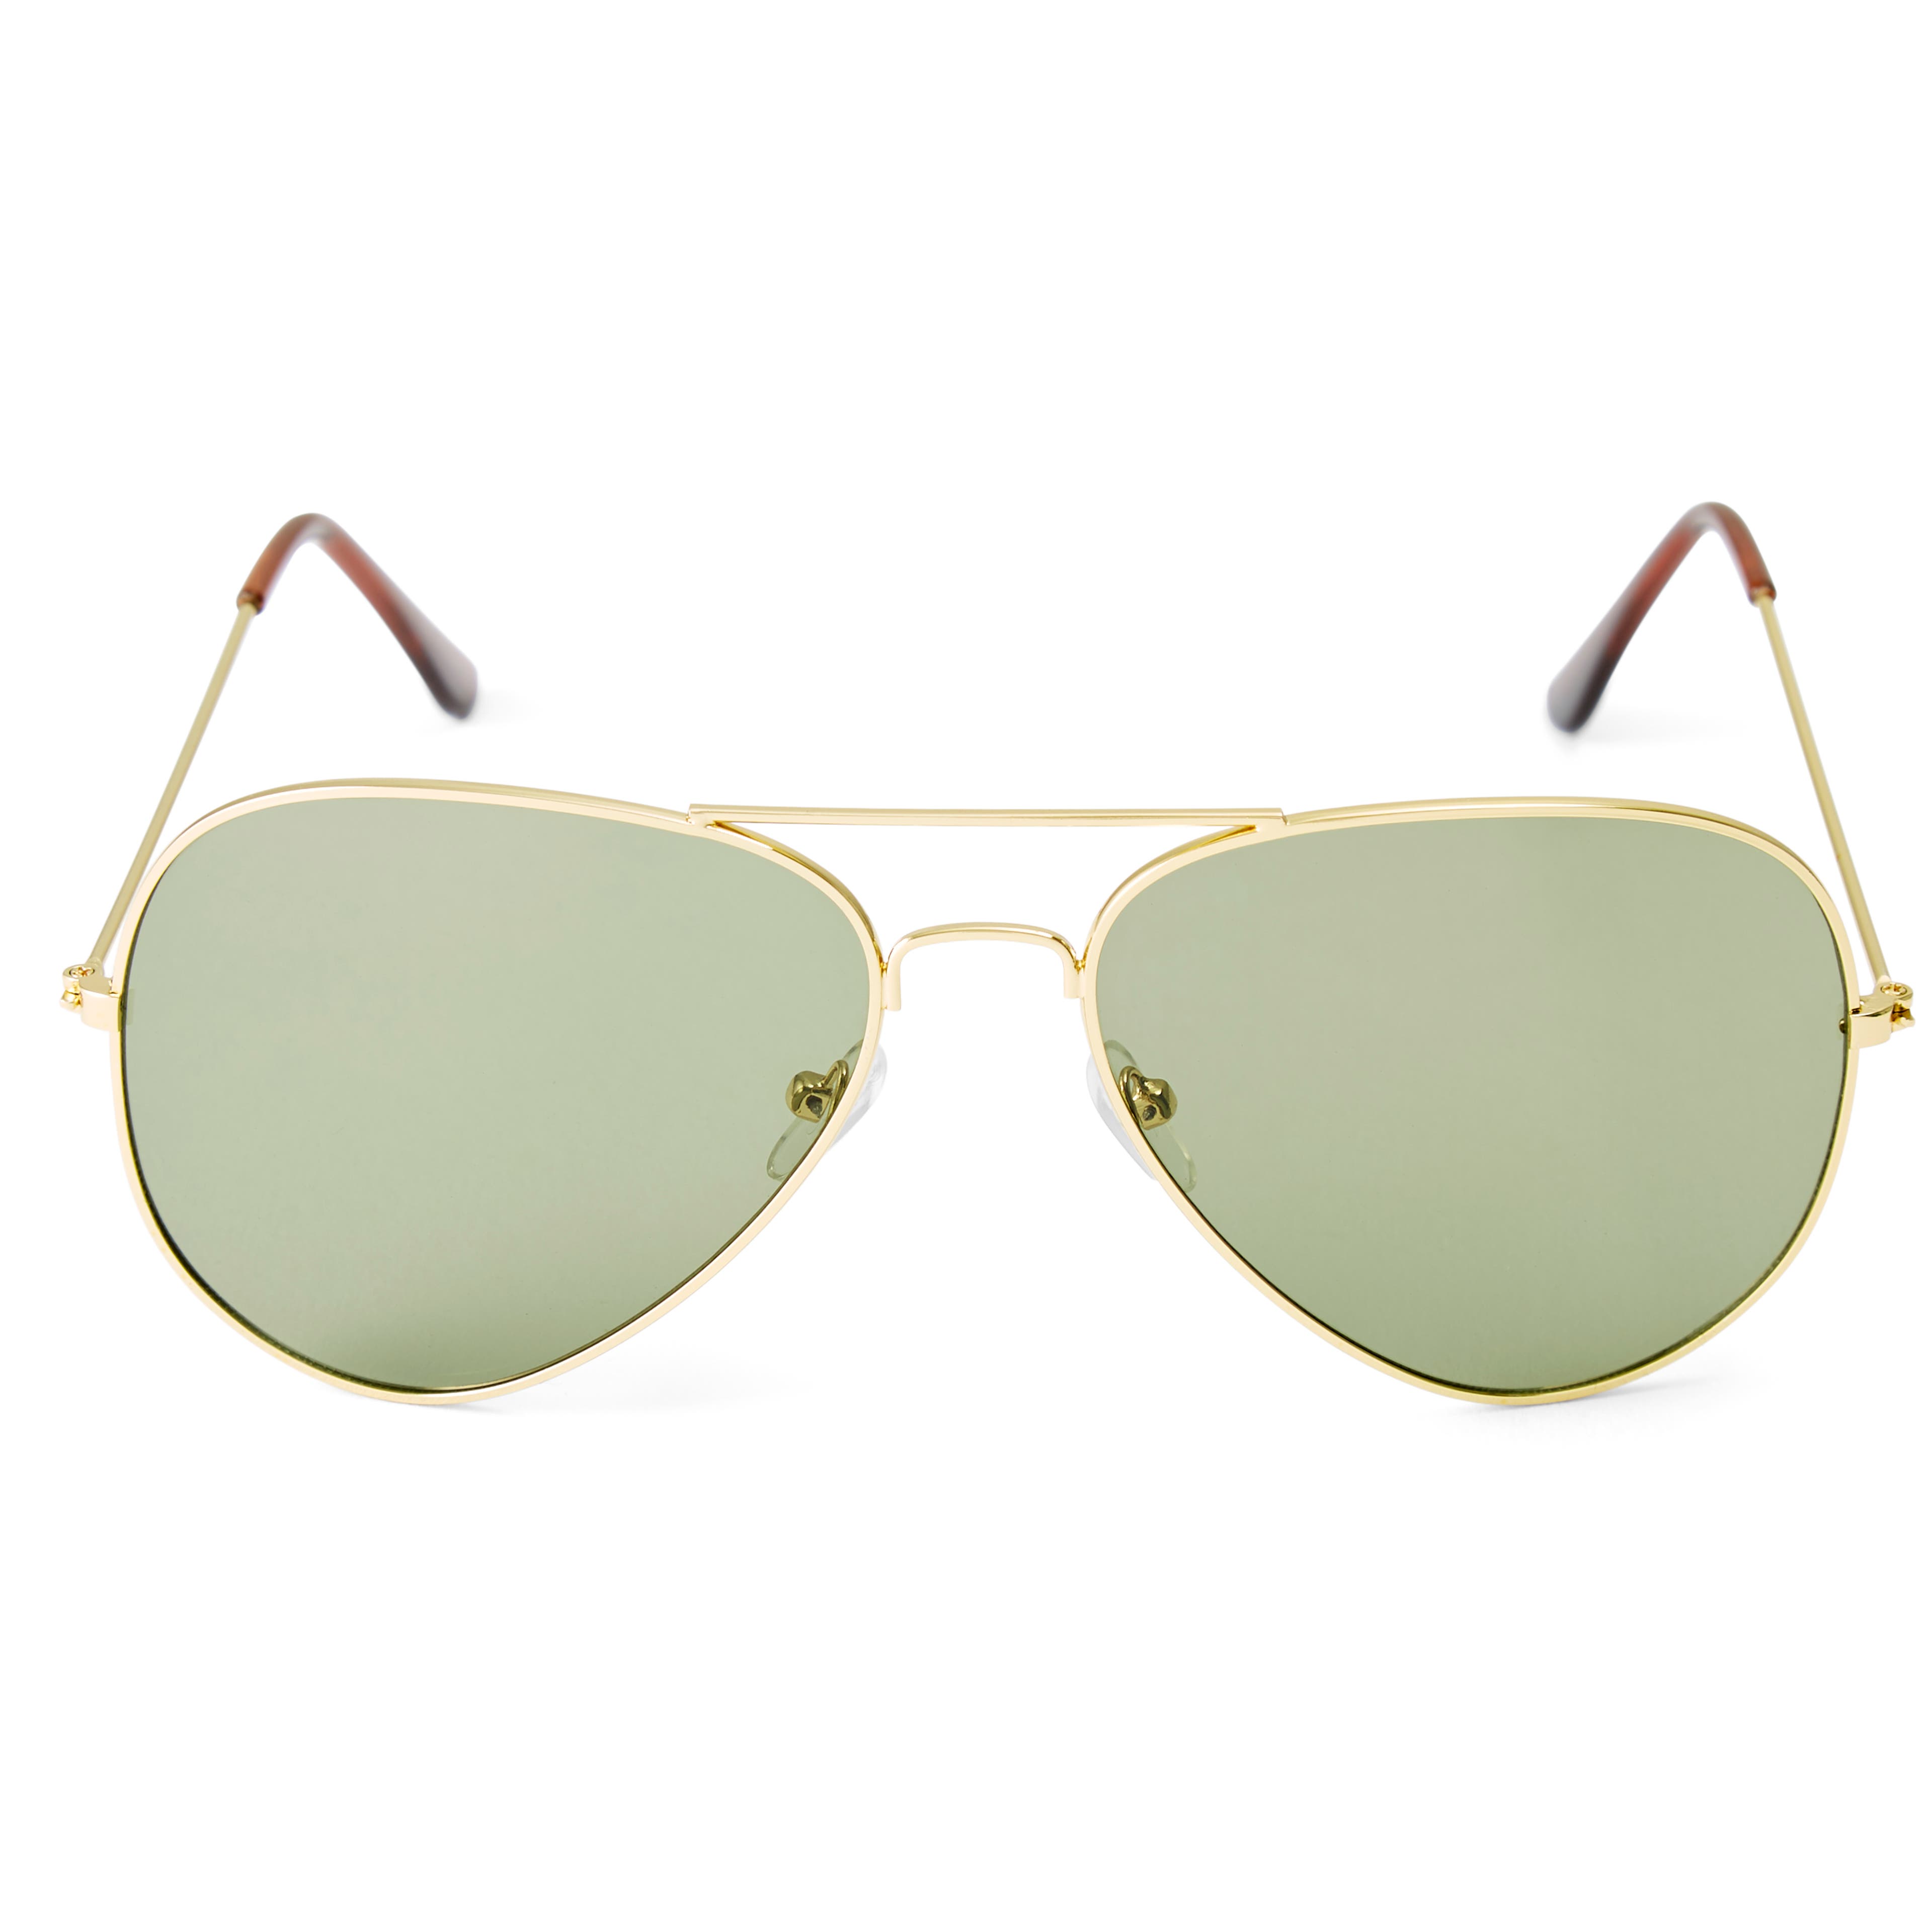 Real Kids Shades Gold Aviator Metal Frame with Green Lens 10+, unisex